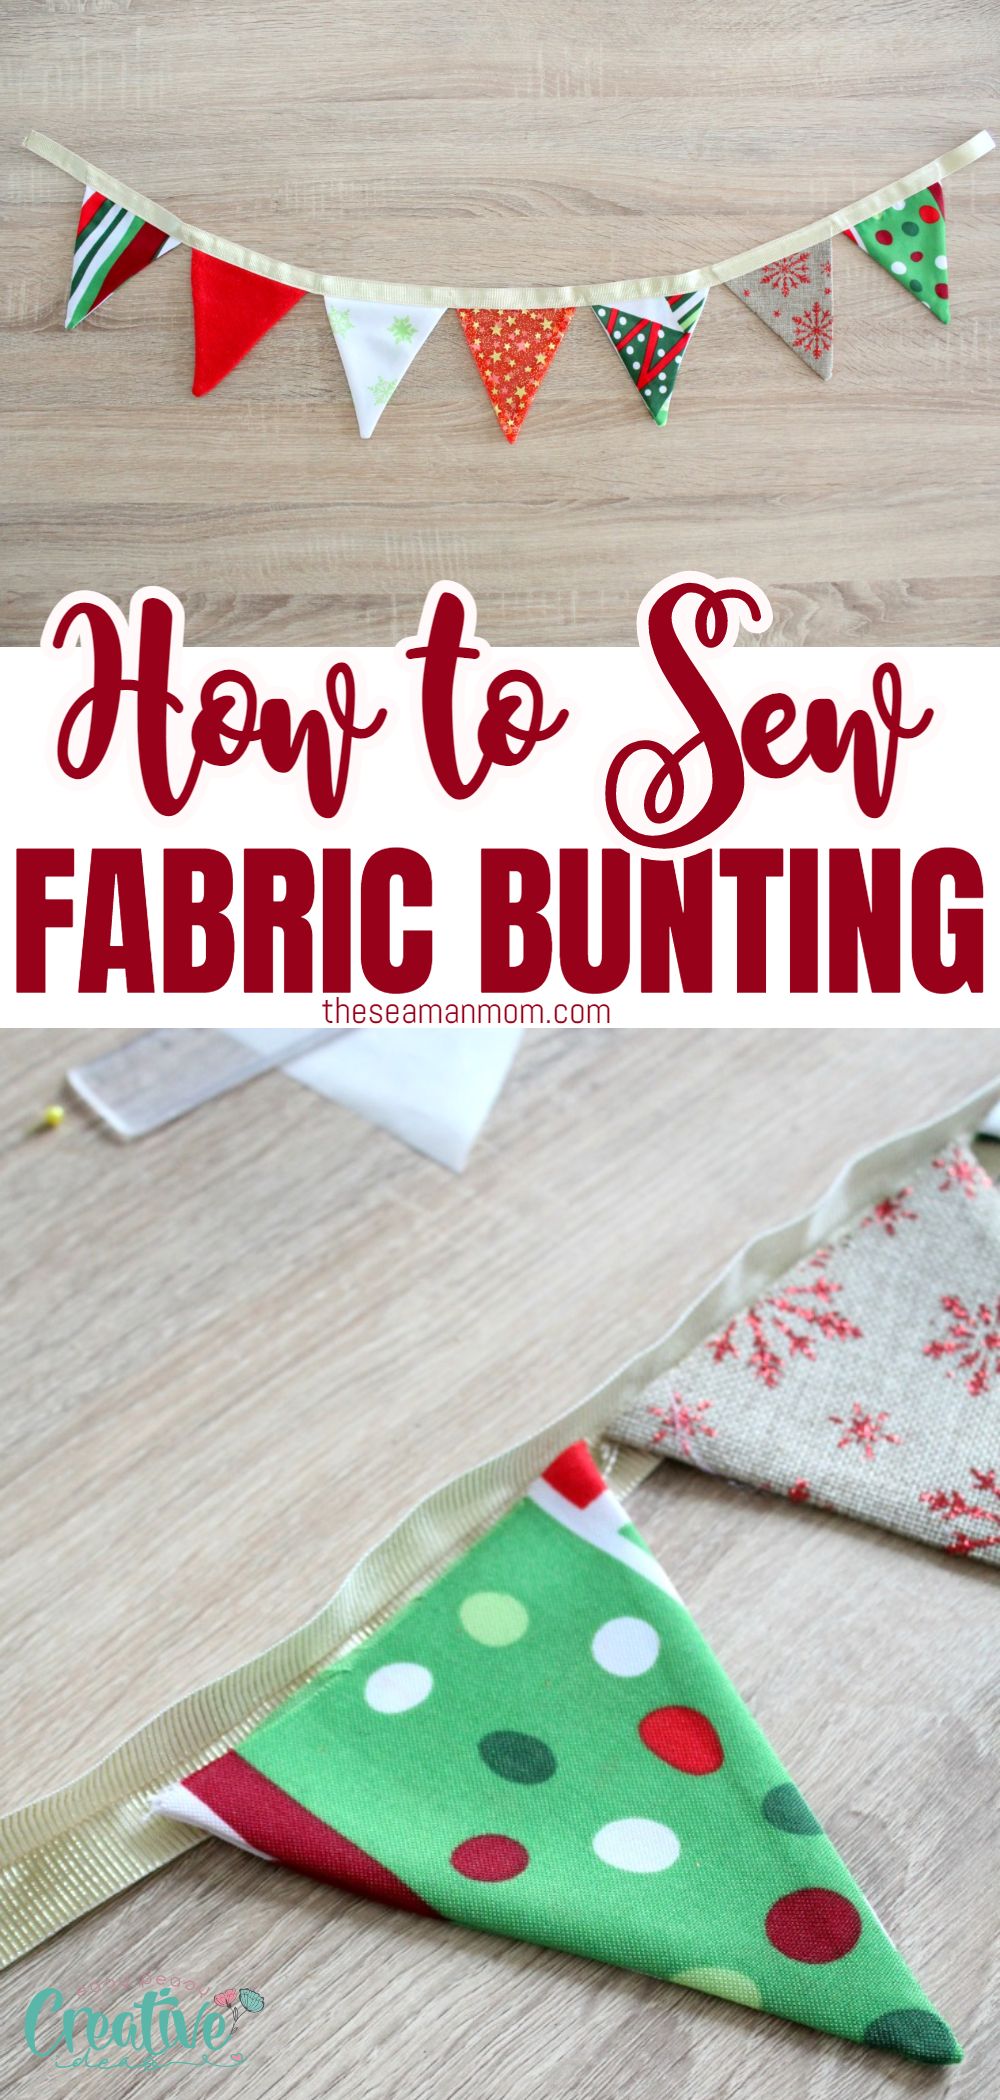 With endless color choices, Christmas fabric buntings are an excellent way to add color and texture to a room, the easy and quick way. Make your own DIY Christmas bunting in just a few steps with this easy fabric bunting tutorial. via @petroneagu